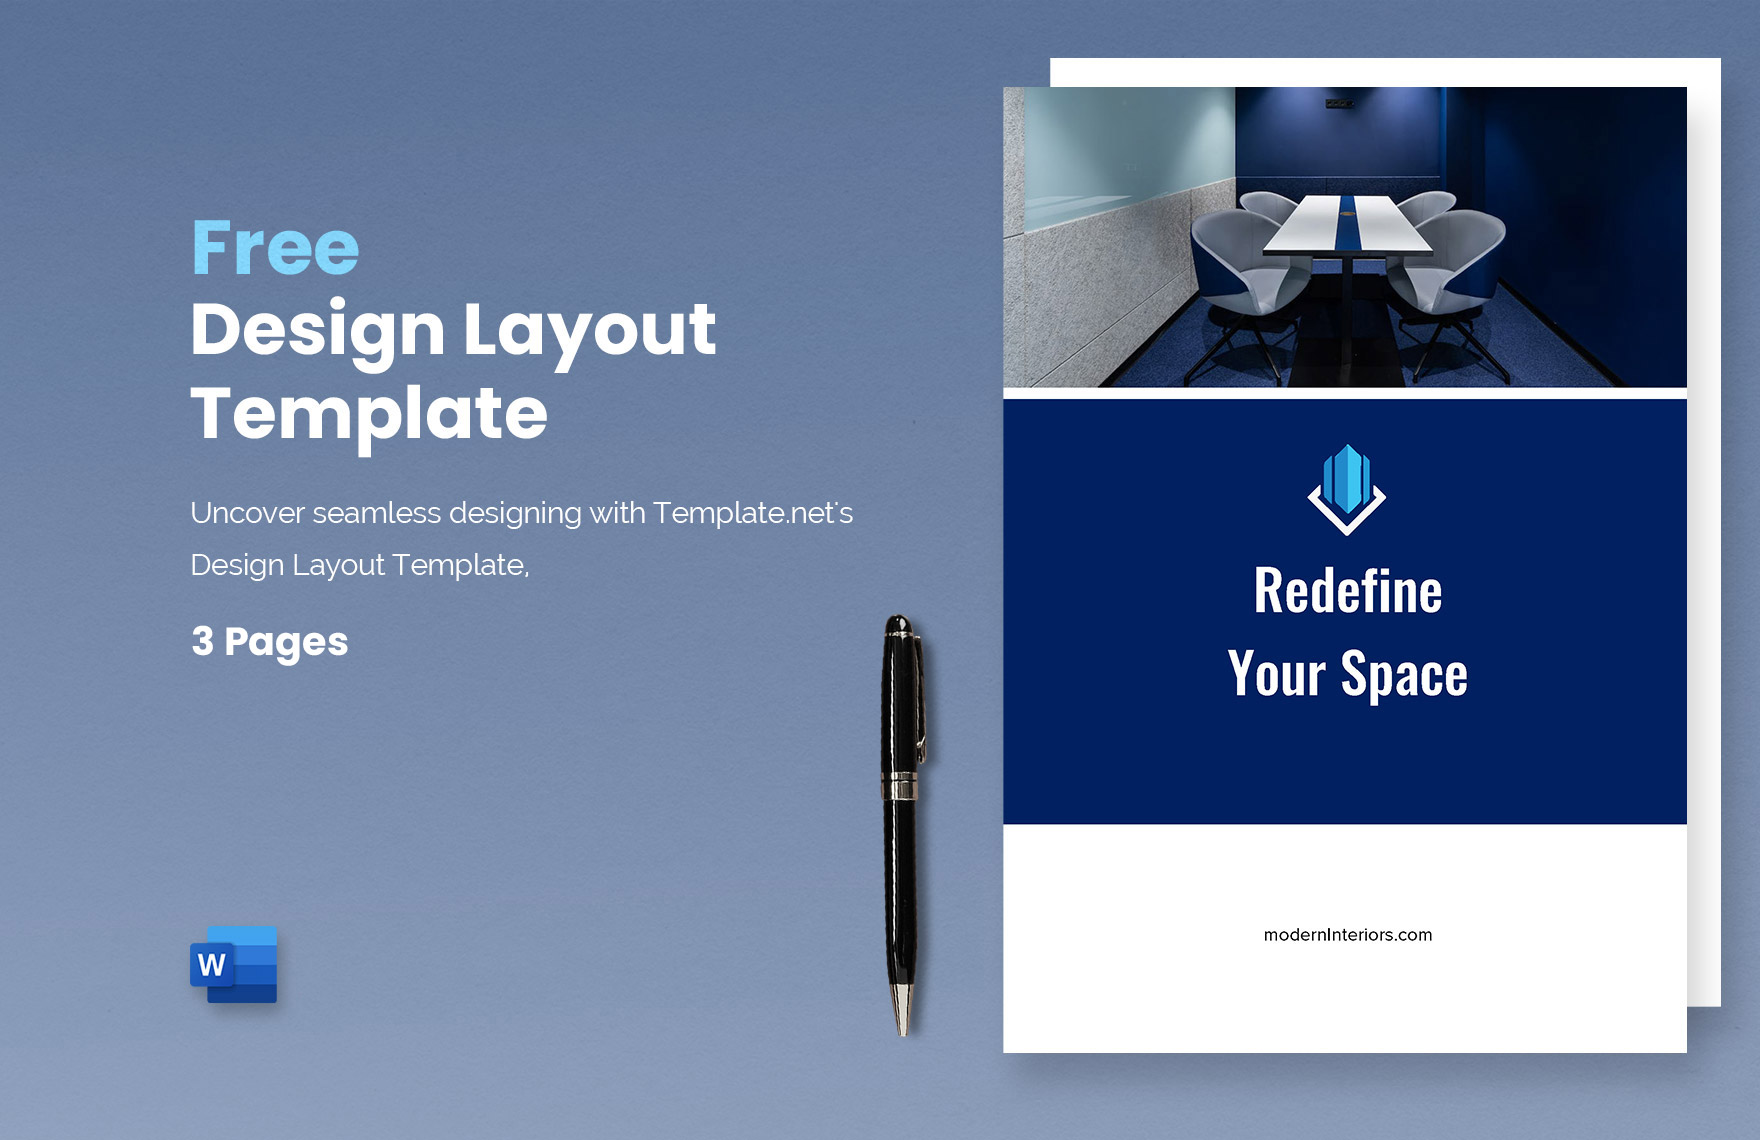 Free Design Layout Template